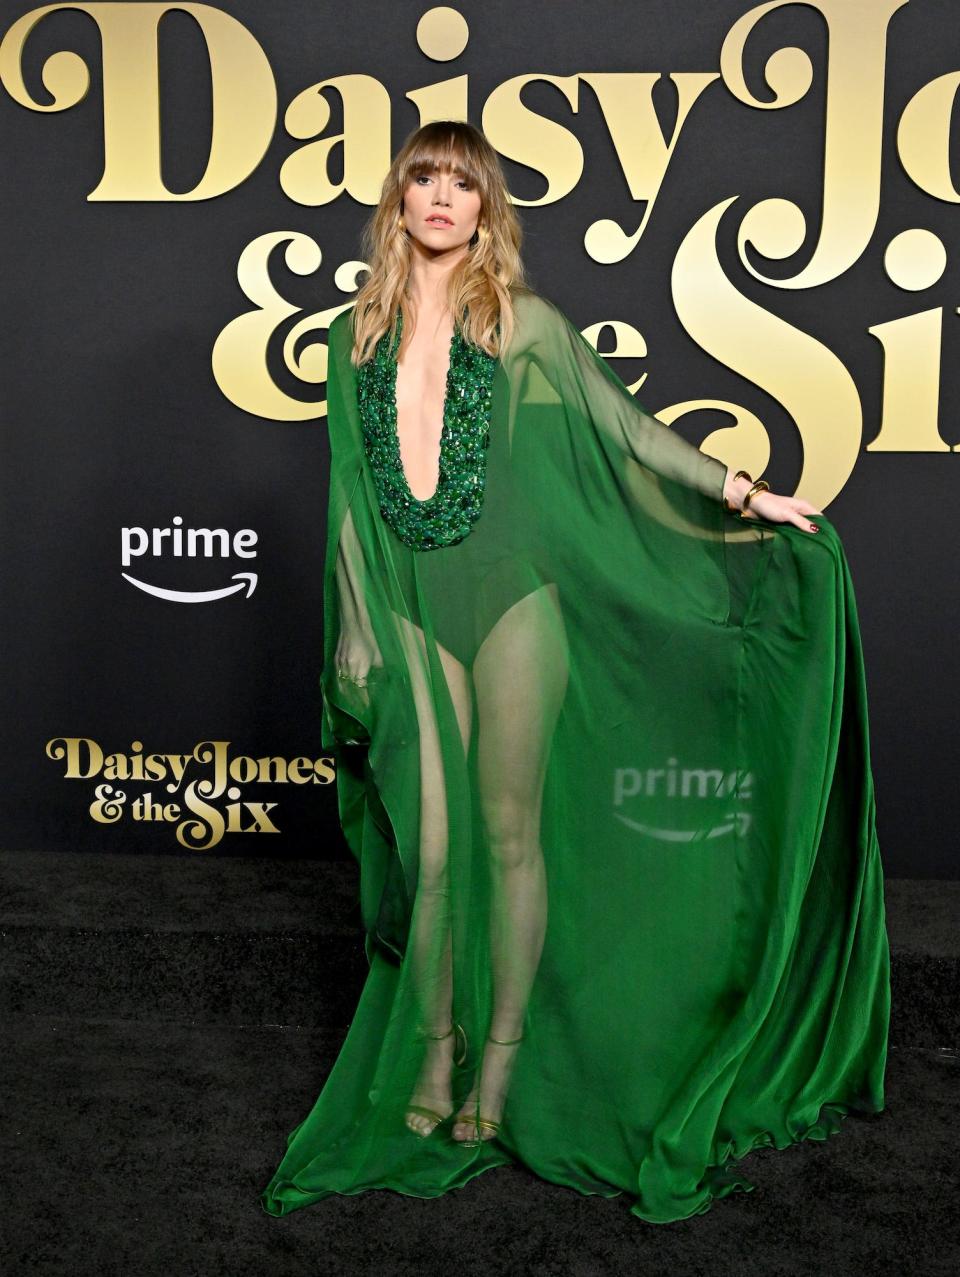 Suki Waterhouse attends the "Daisy Jones & The Six" premiere in Hollywood, California, on February 23, 2023.